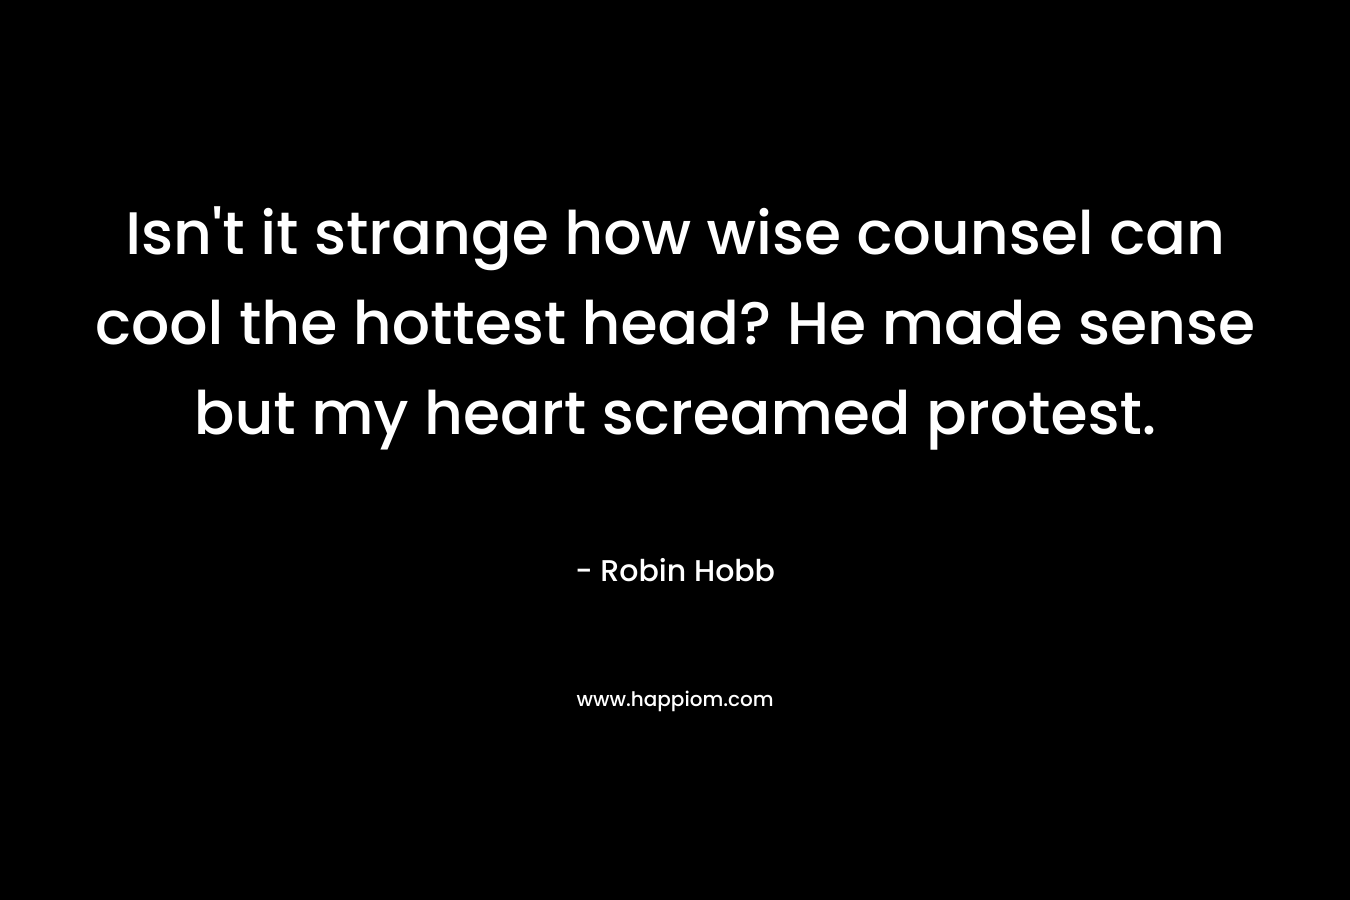 Isn't it strange how wise counsel can cool the hottest head? He made sense but my heart screamed protest.